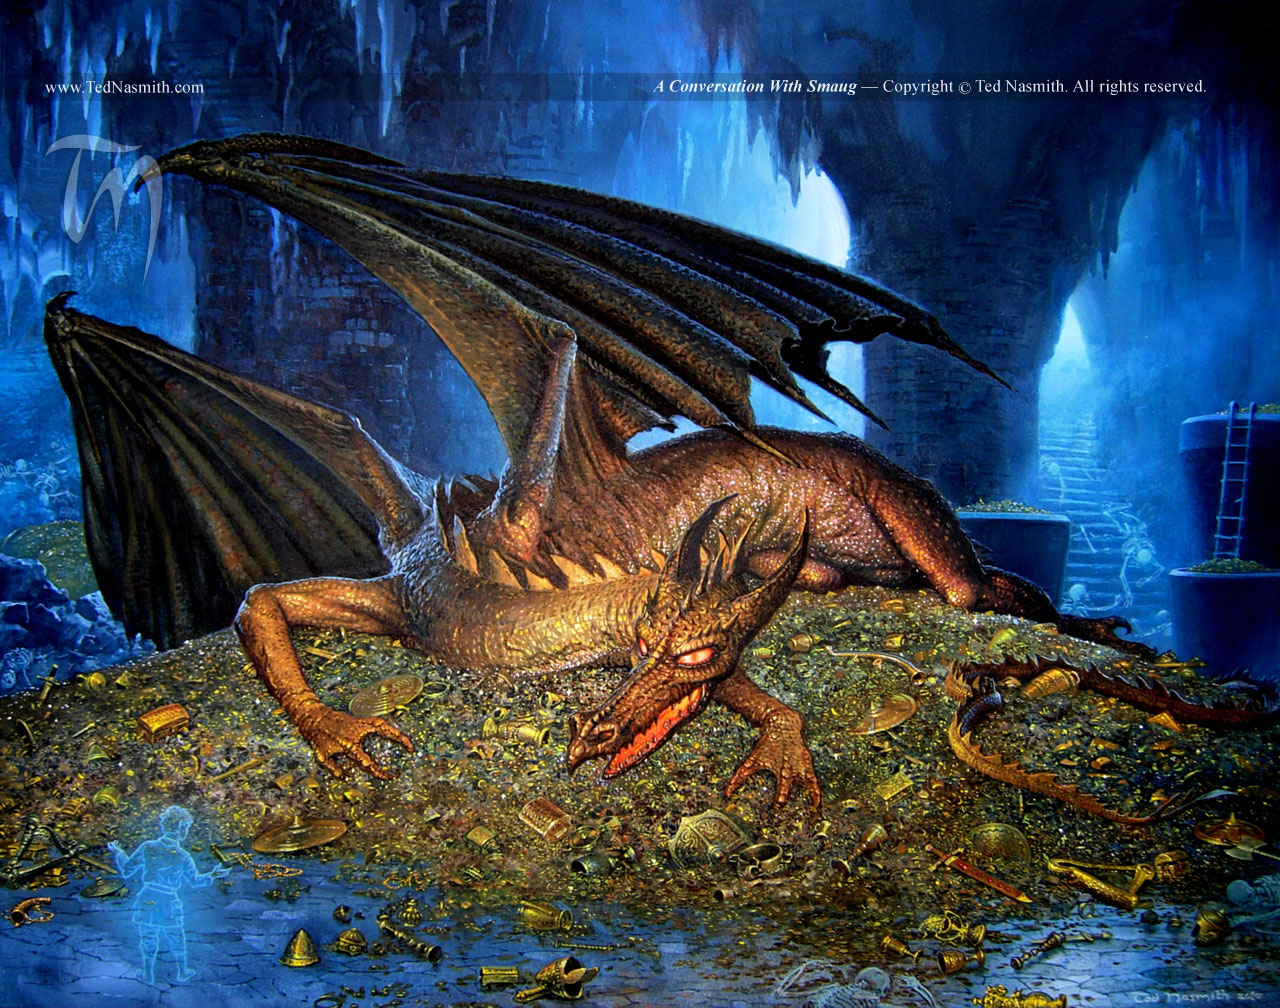 A Conversation with Smaug by Ted Nasmith